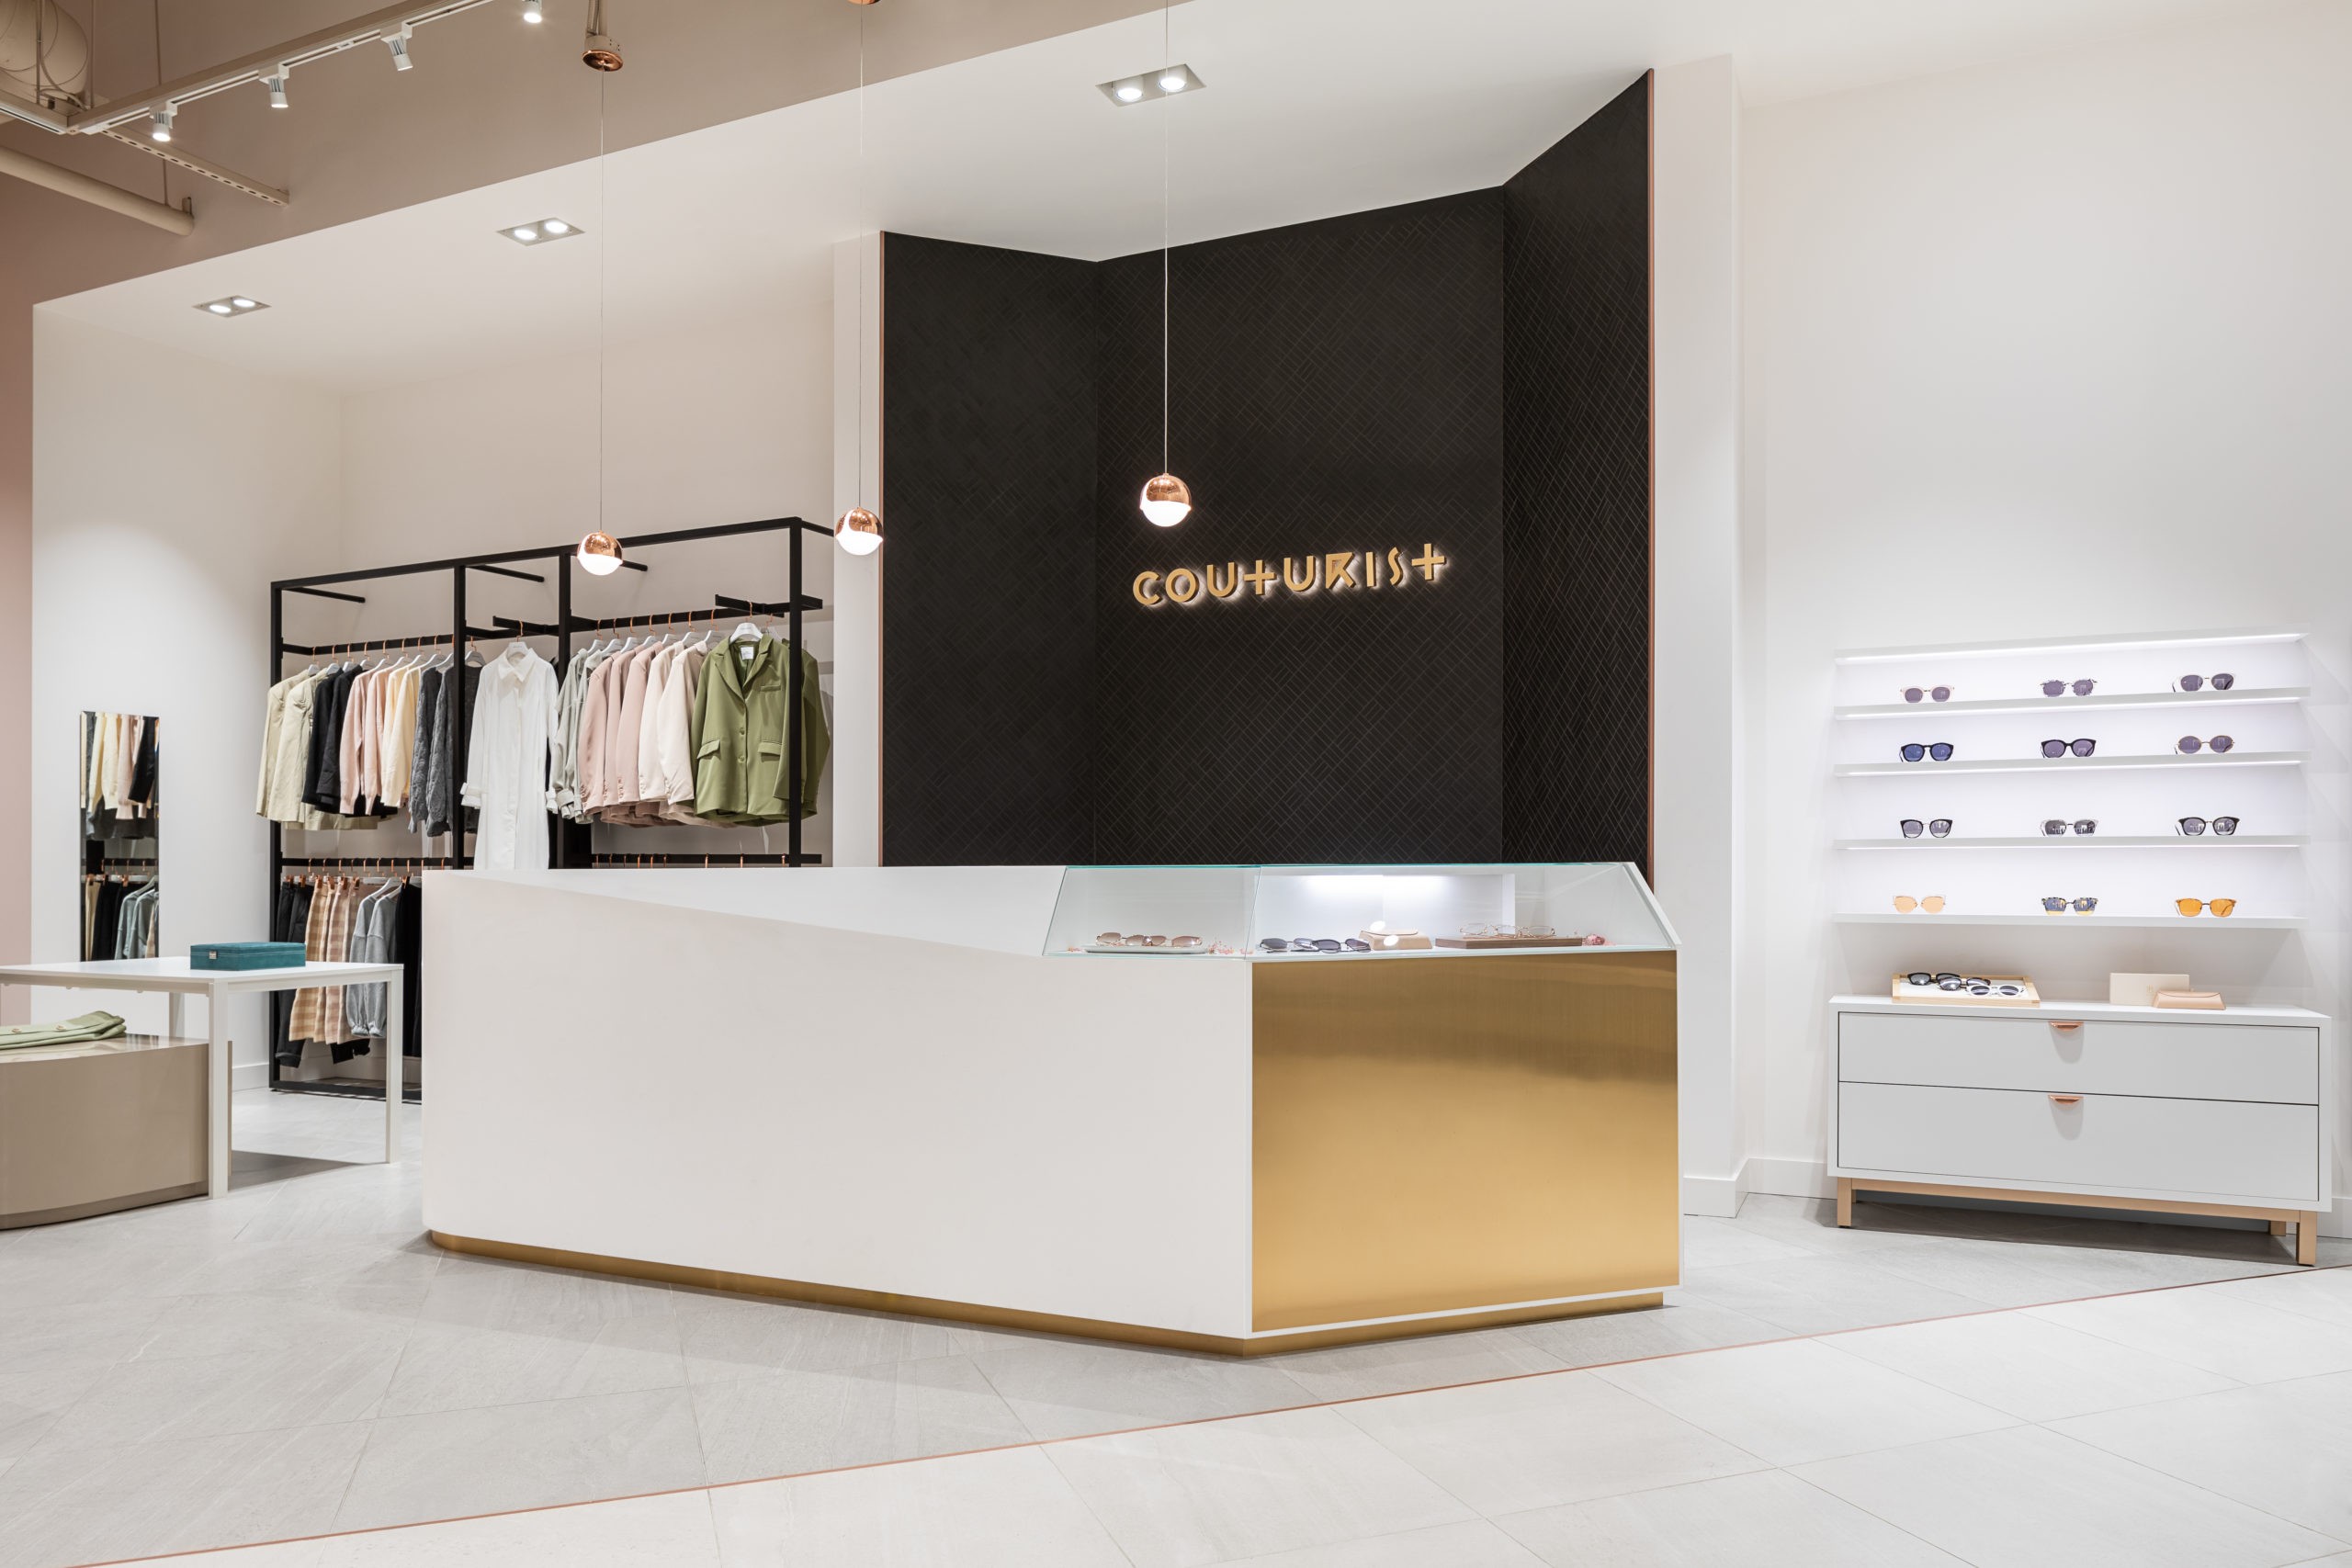 Couturist in Burnaby  BC Retail & Showroom Interior Design Cash desk and feature wall  by Cutler